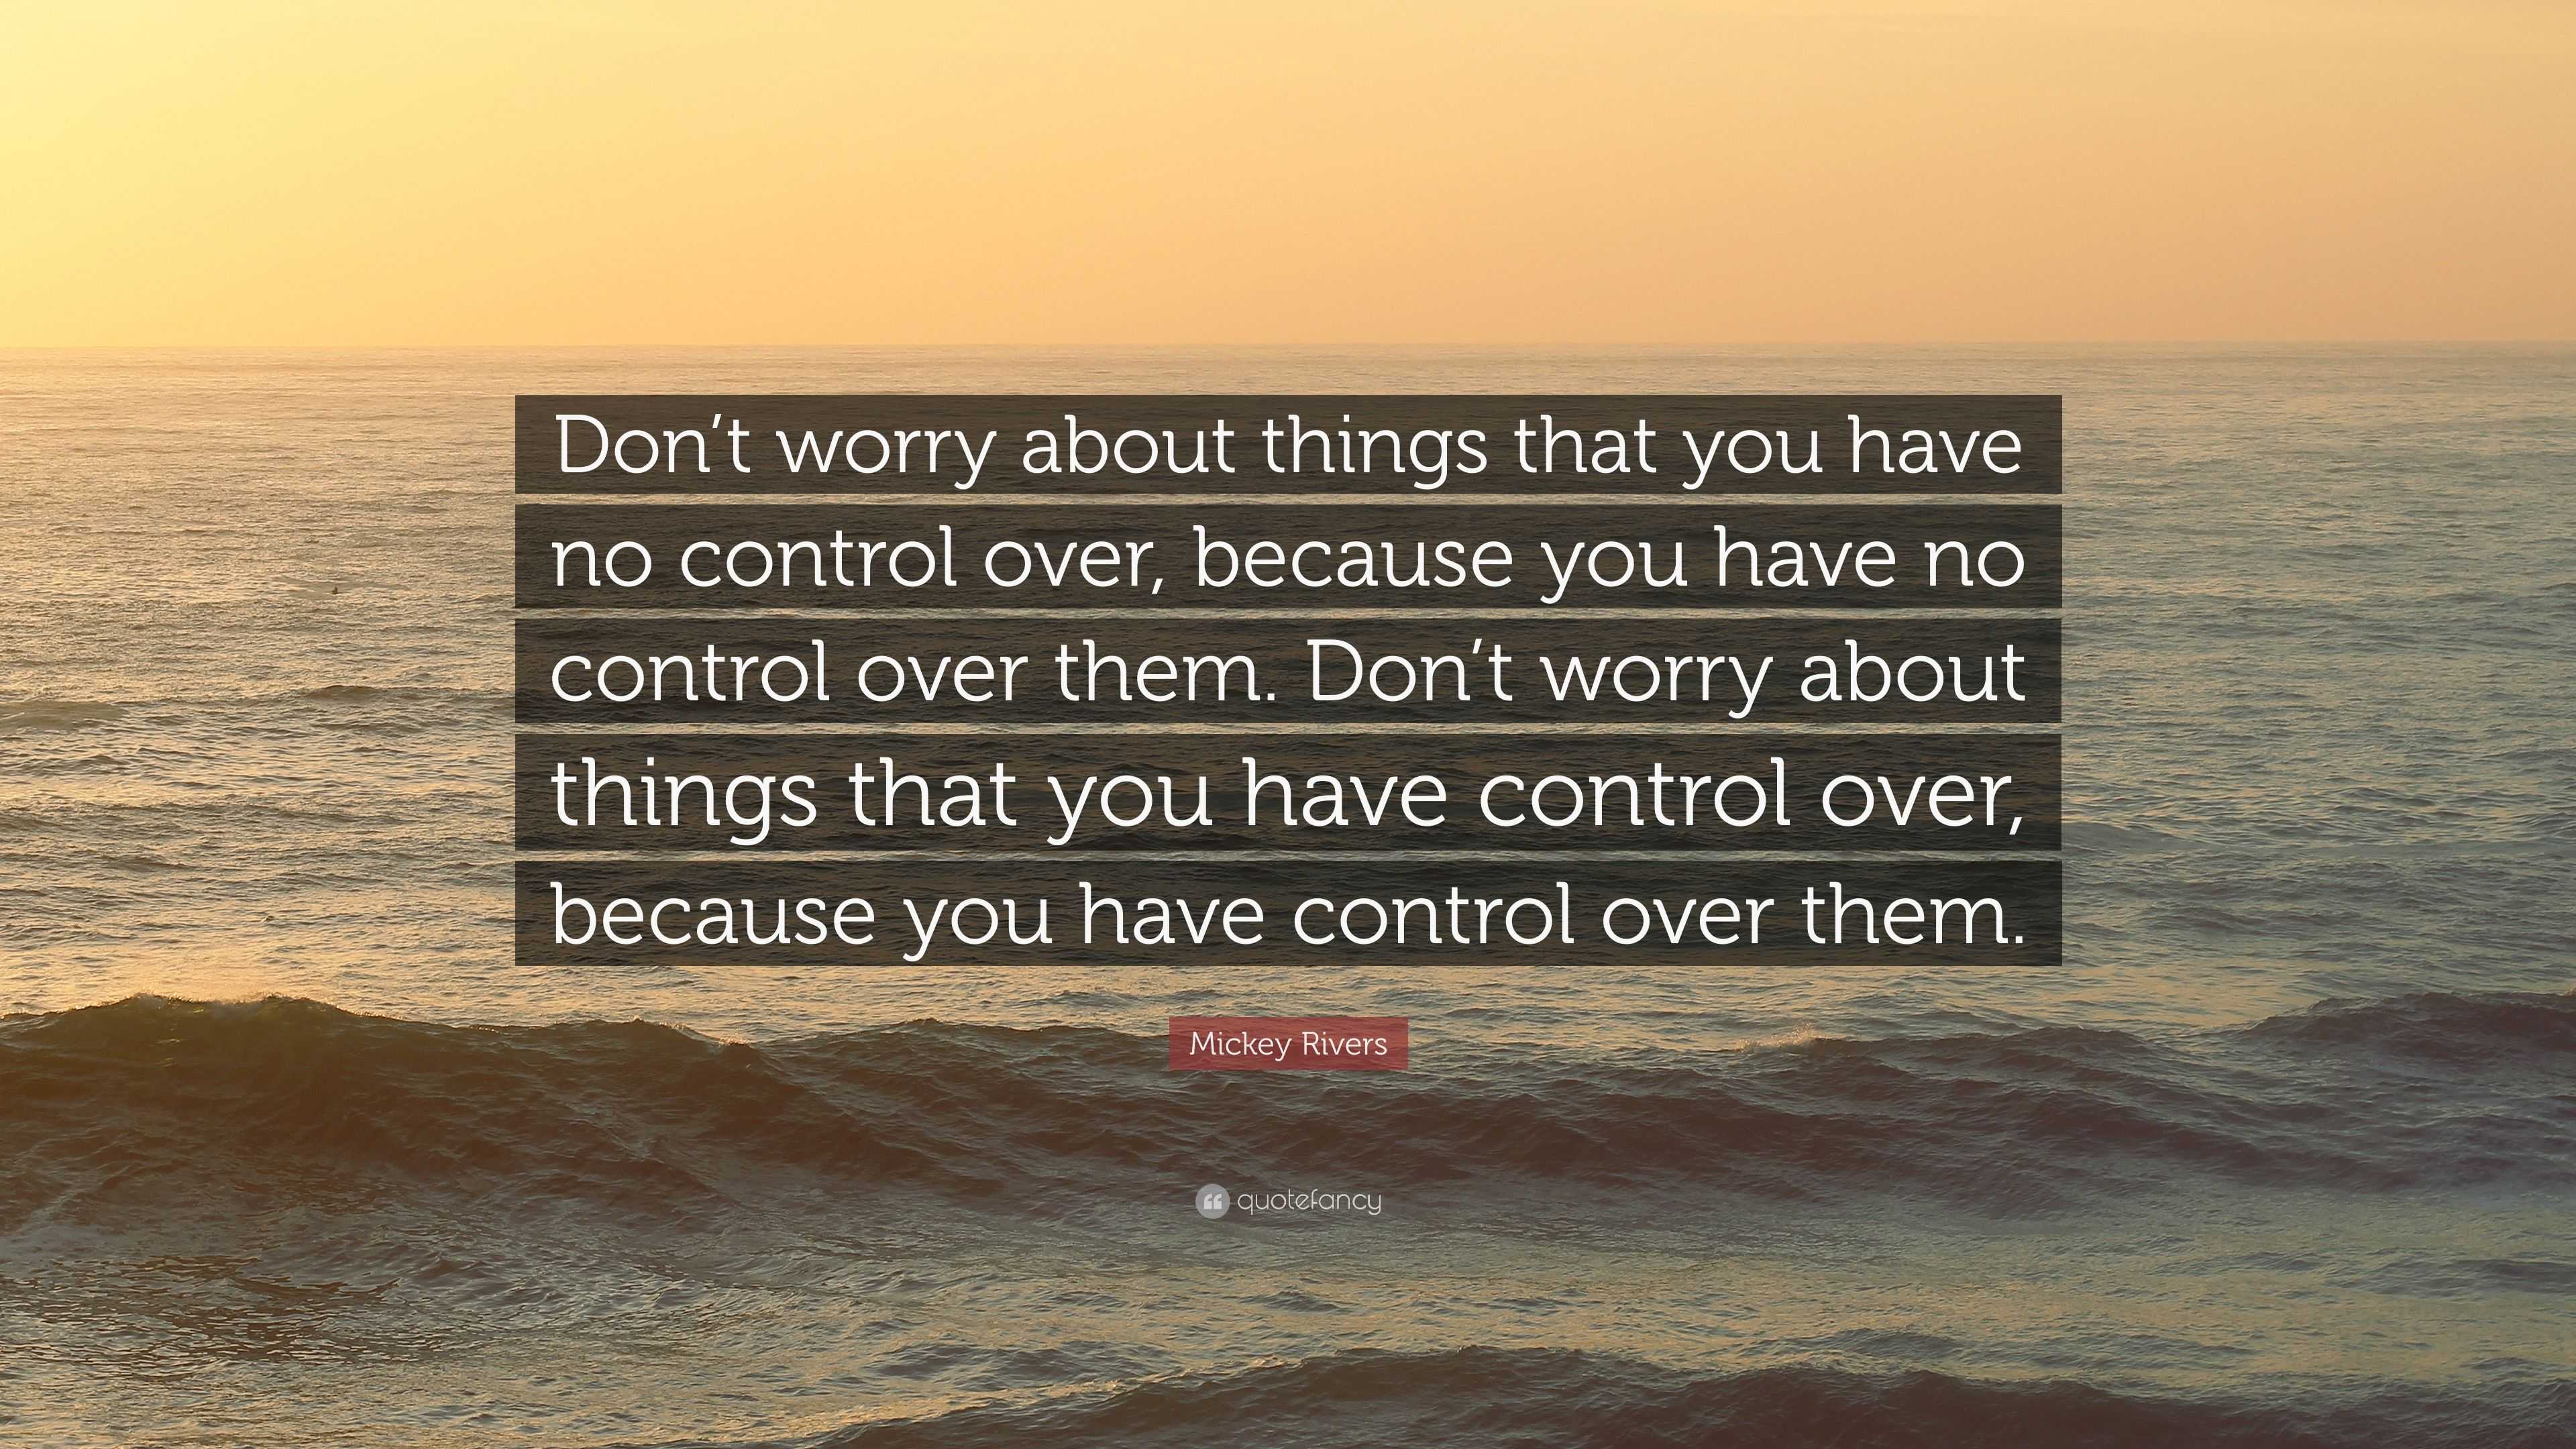 Mickey Rivers Quote: "Don't worry about things that you ...